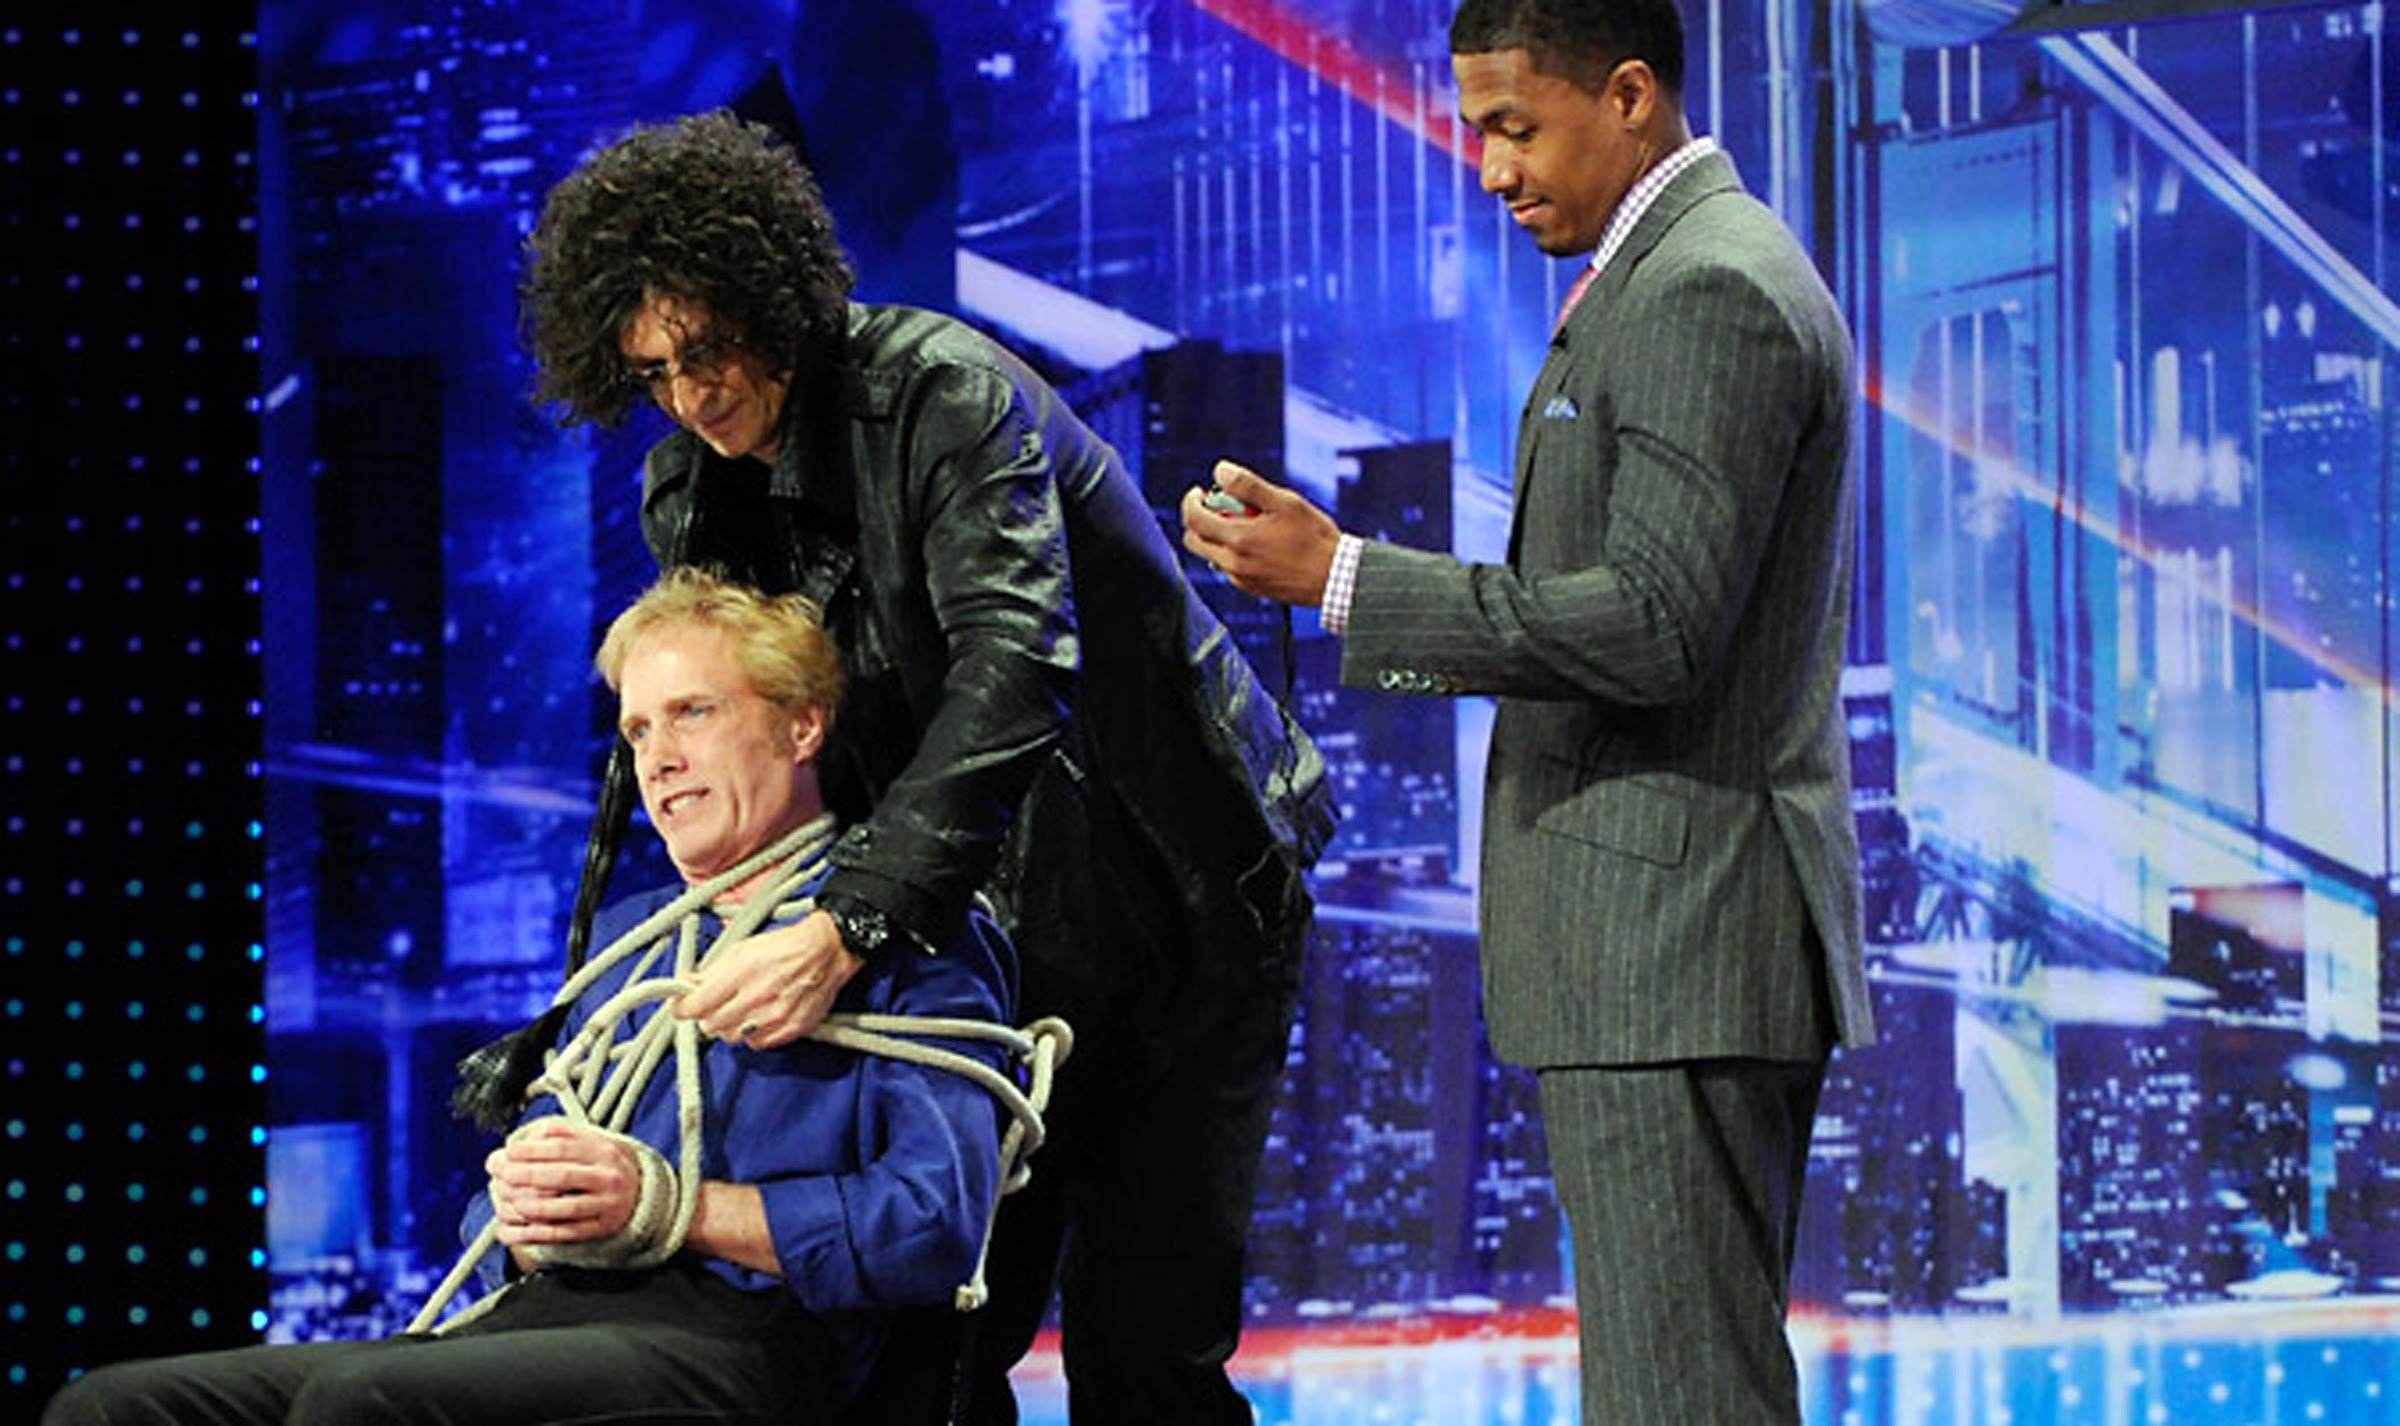 escape artist michael griffin gets tied up by howard stern